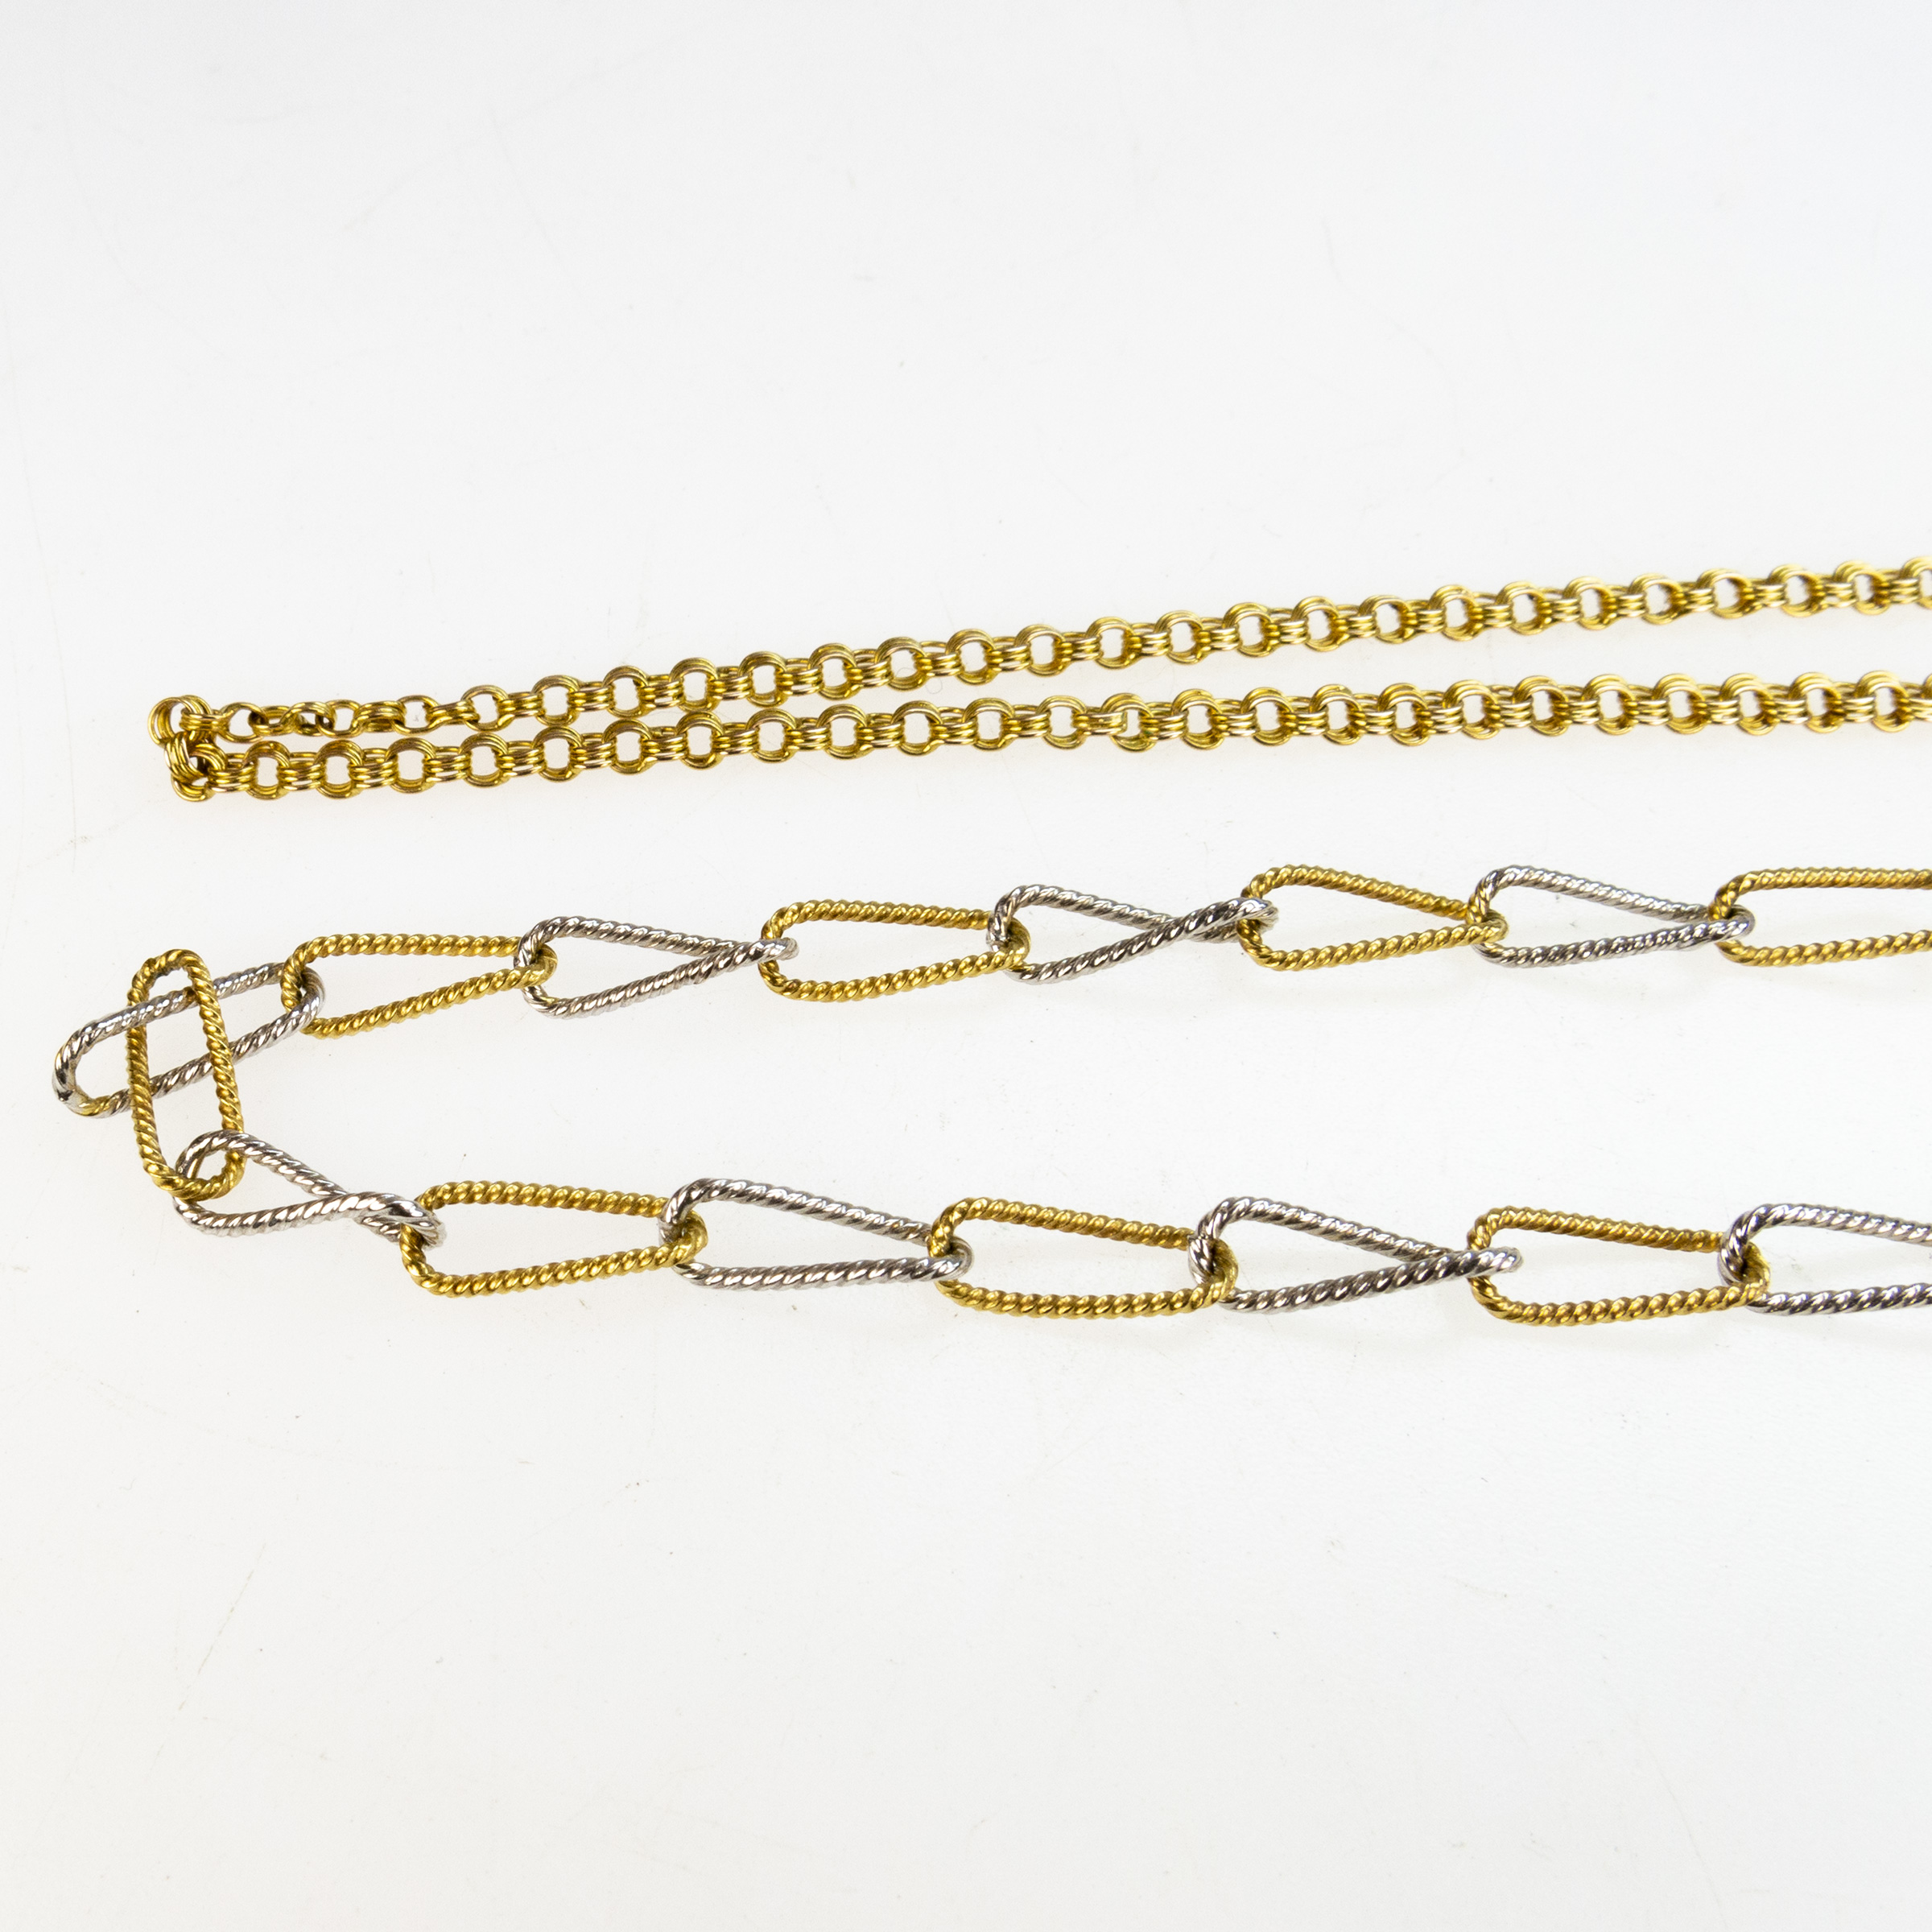 2 x 14k Yellow and White Gold Chains